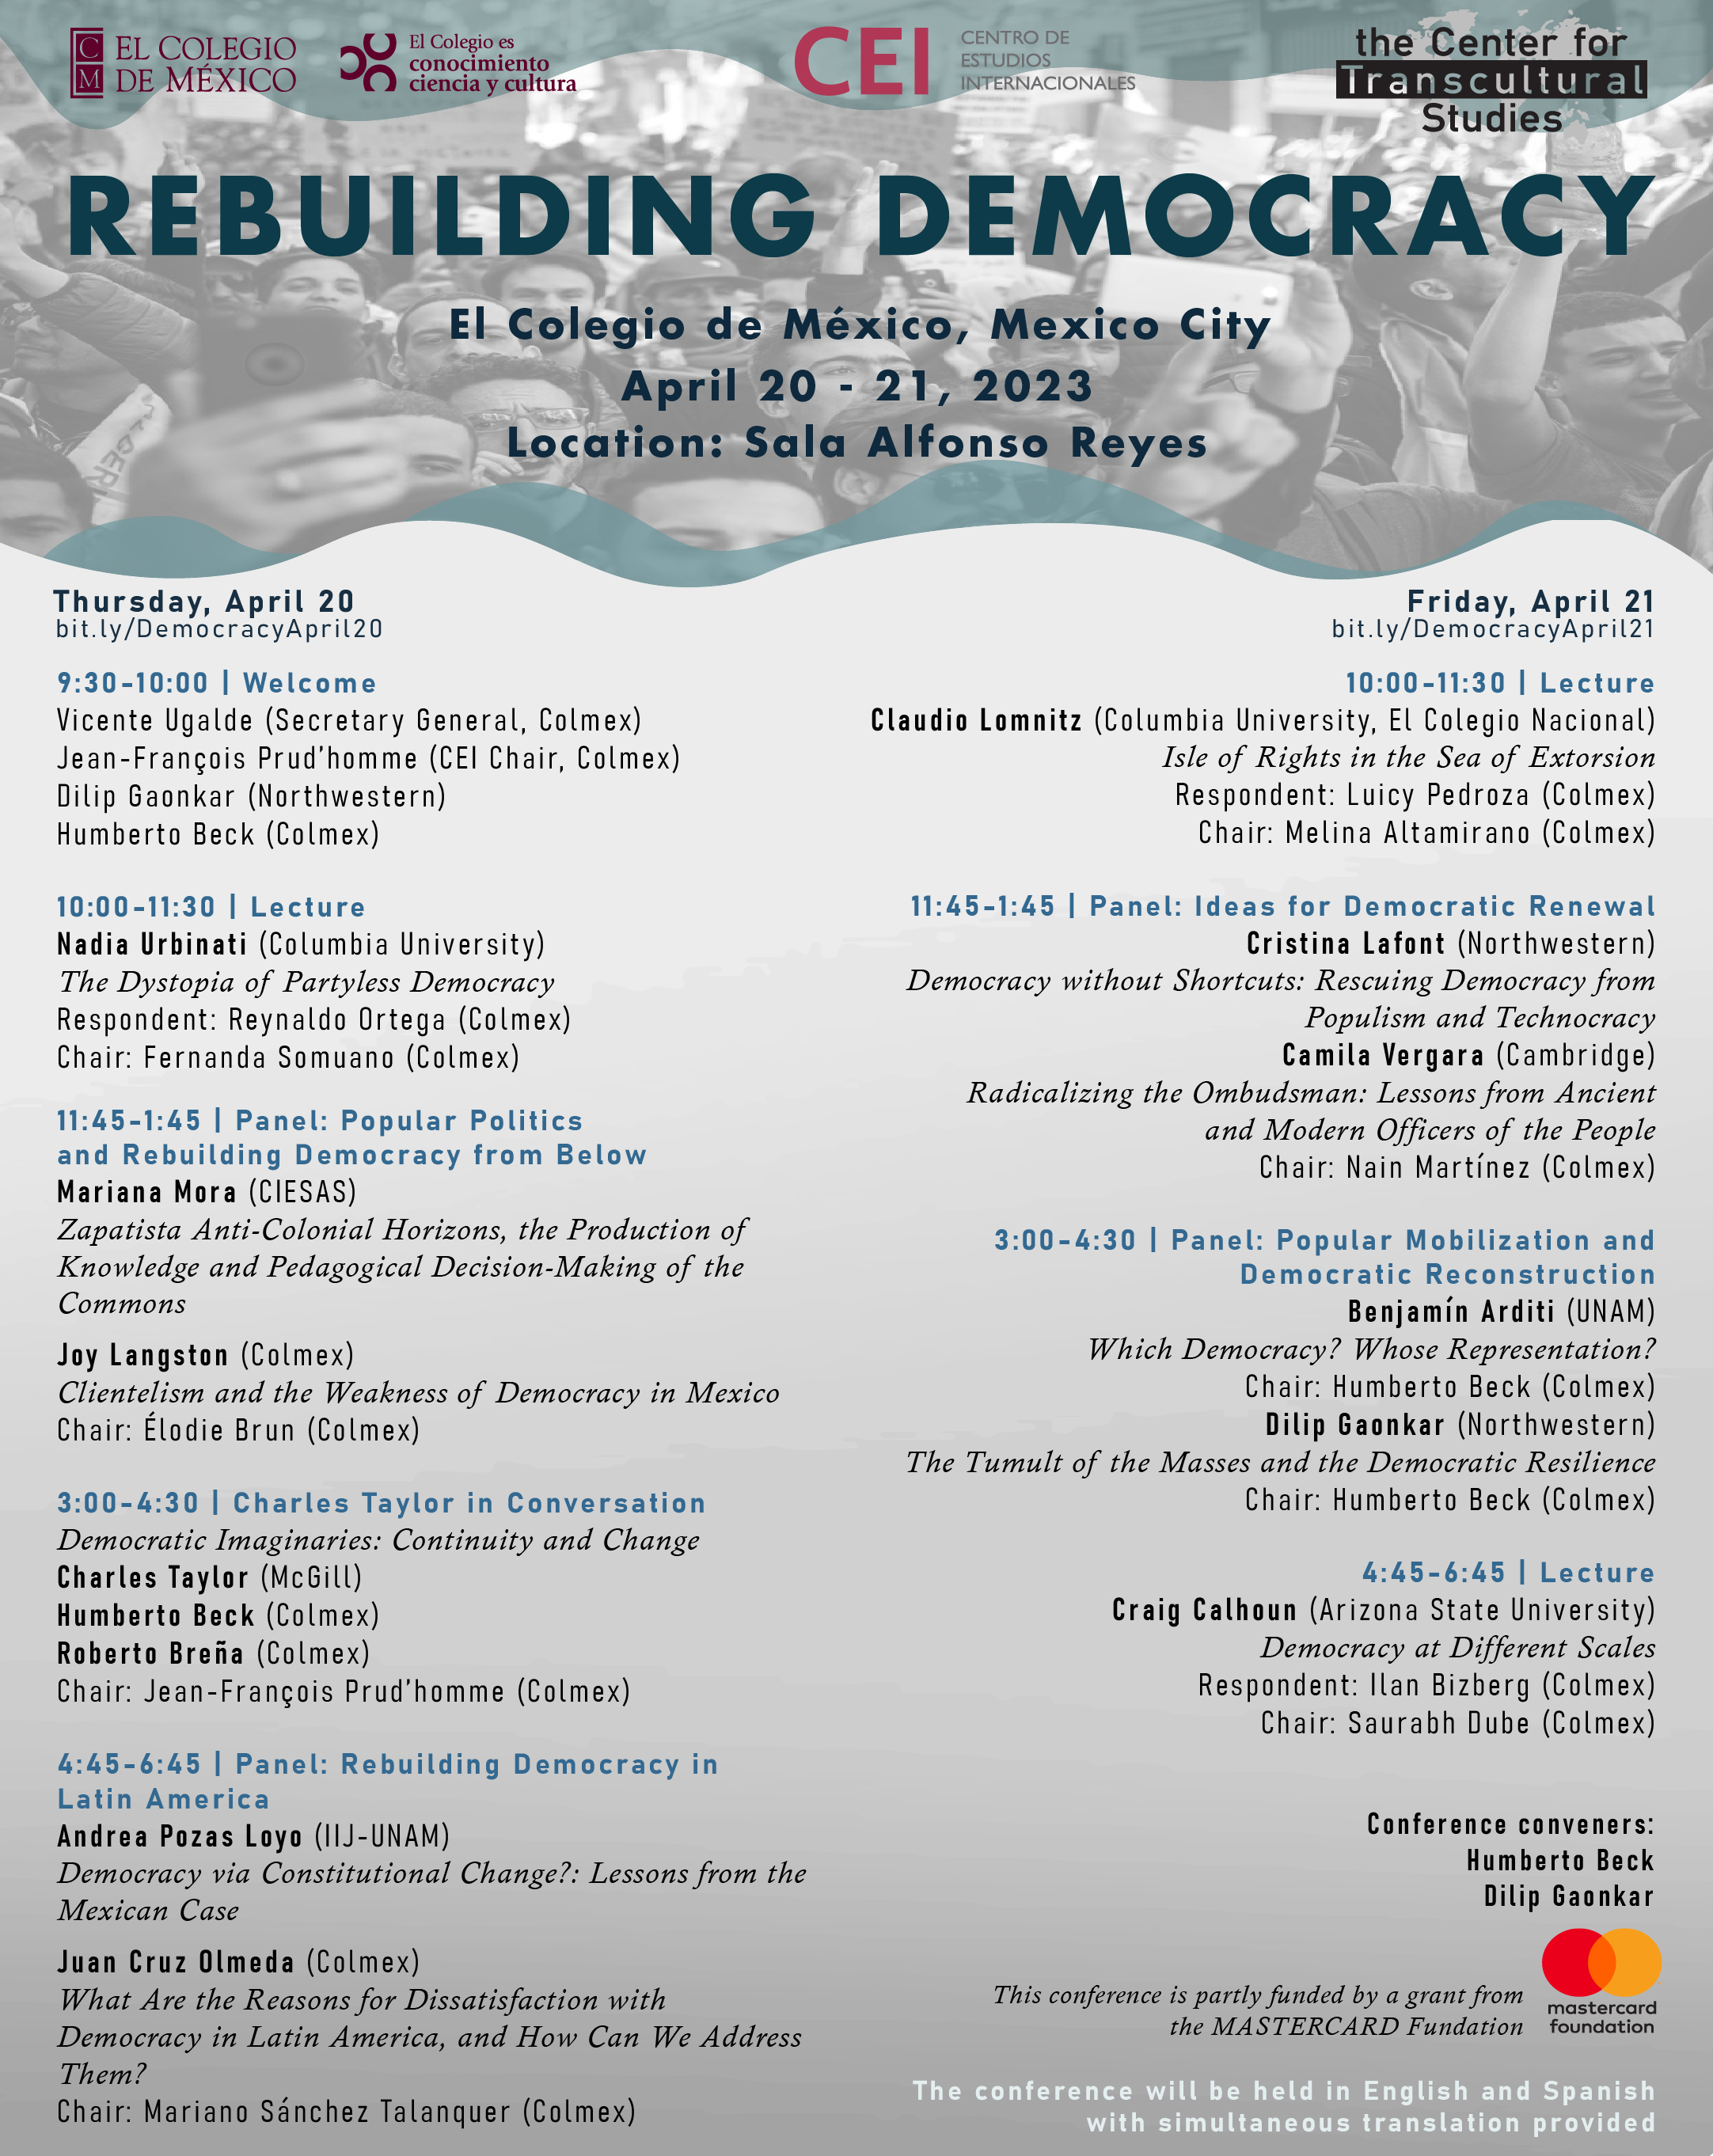 Poster/Schedule for the Rebuilding Democracy Conference